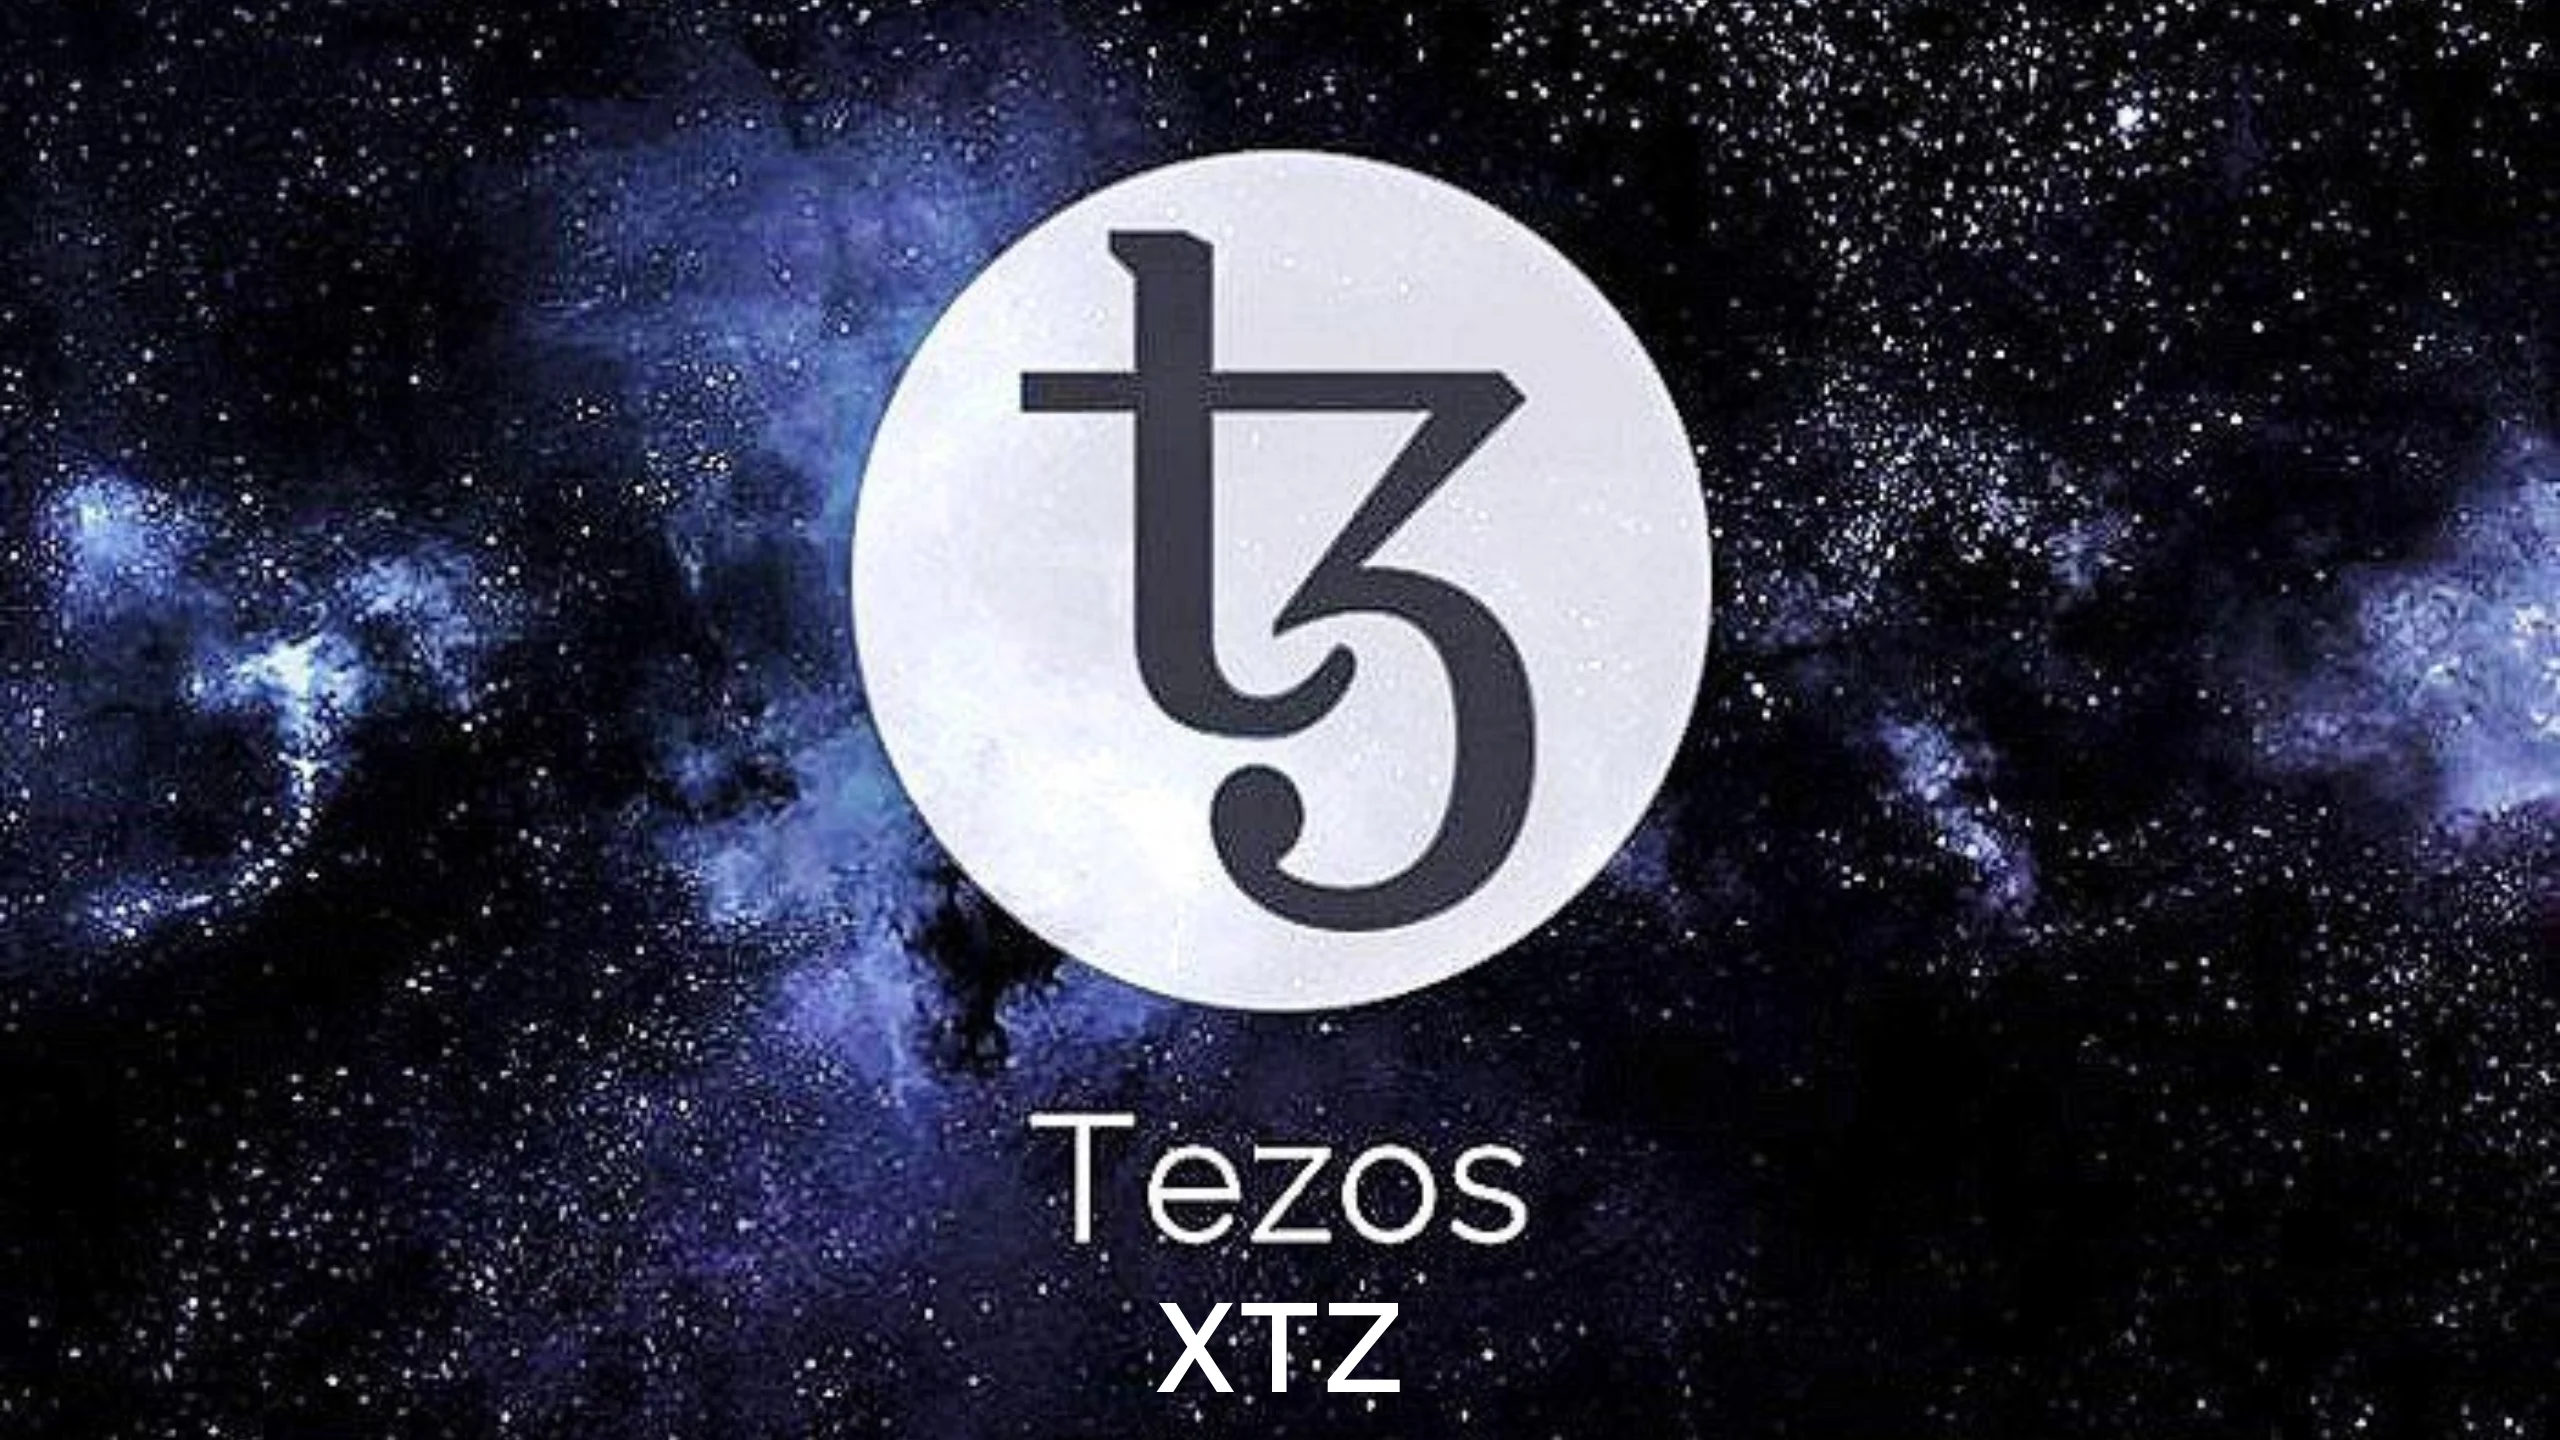 Explore the innovative features and advantages of Tezos (XTZ) in the blockchain ecosystem. Understand how Tezos enables secure, upgradable smart contracts and promotes decentralized governance.